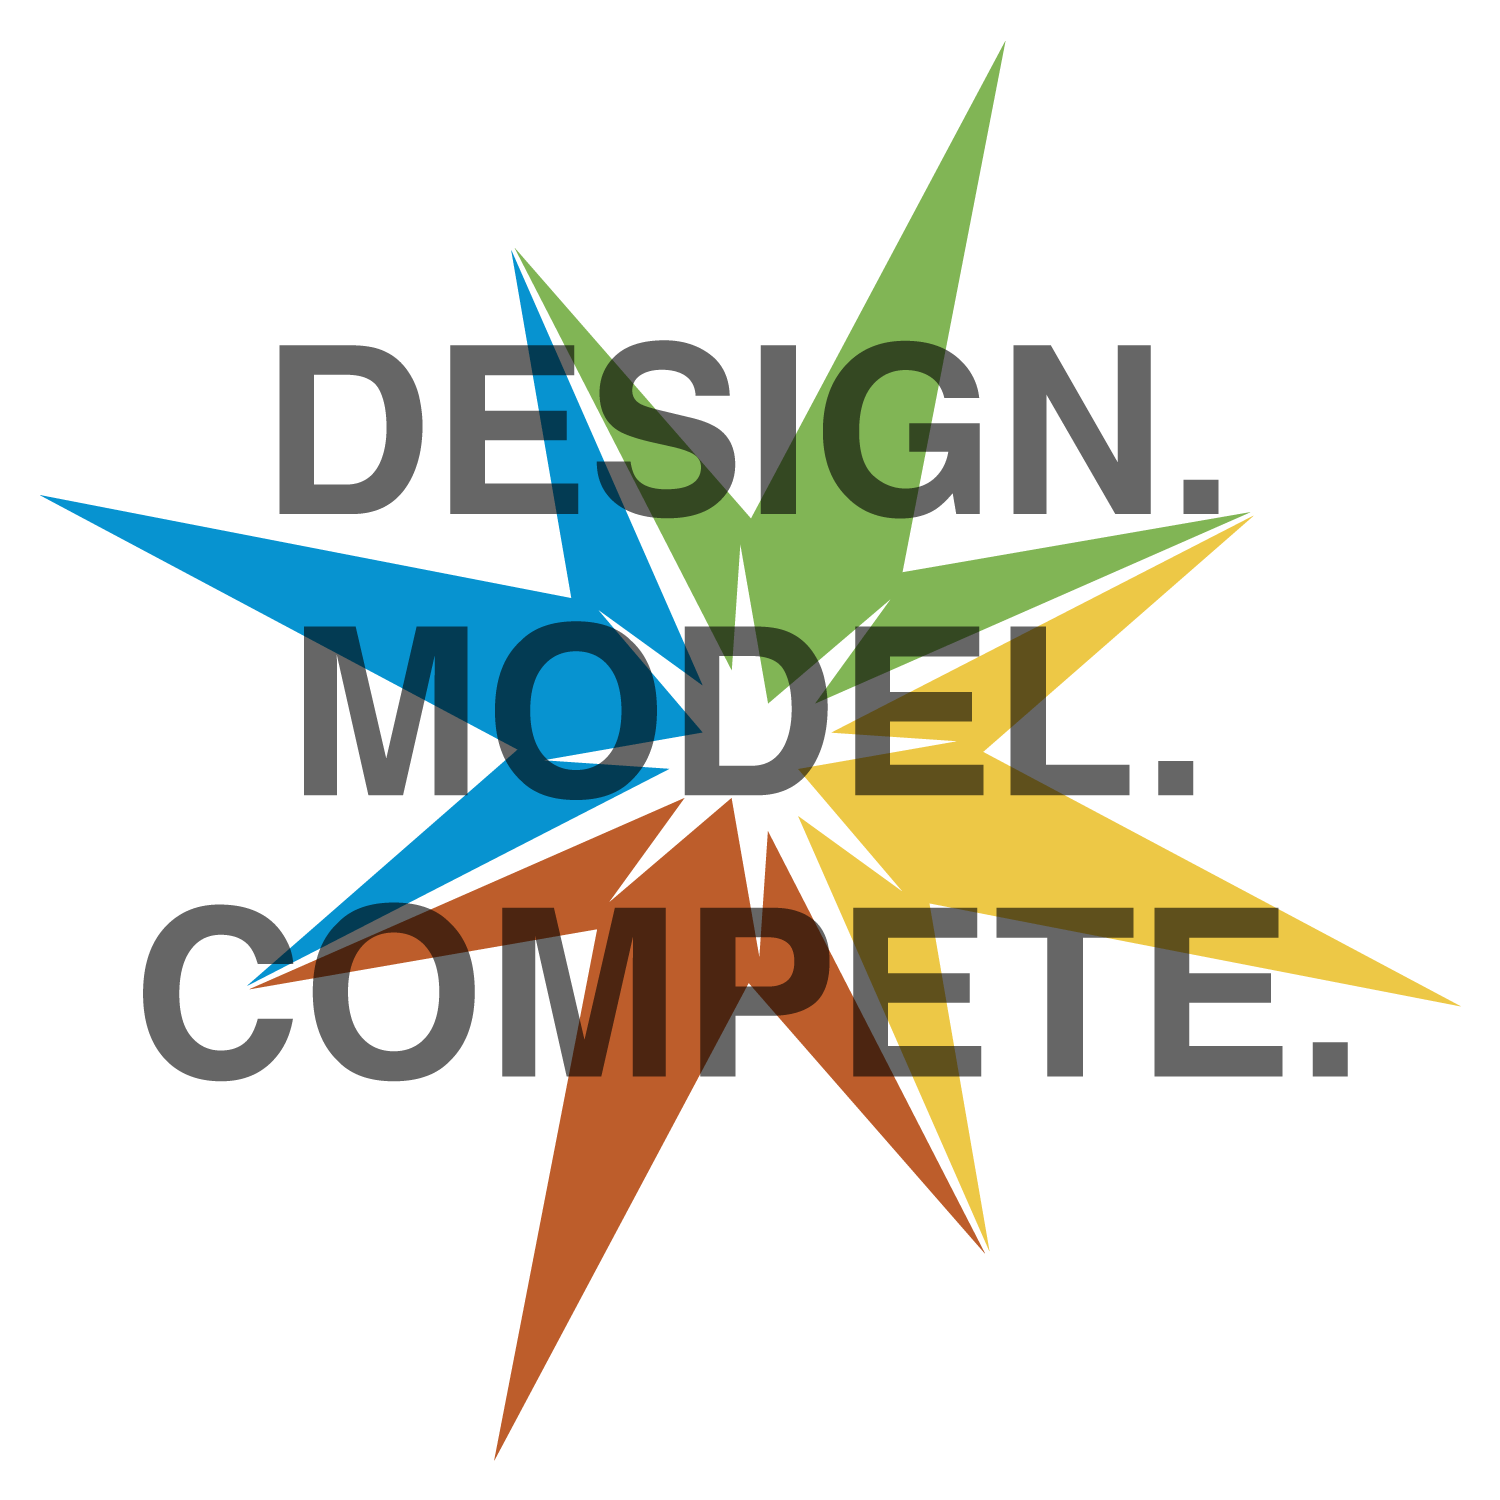 The logo of the National Renewable Energy Laboratory Solar District Cup, over which appear the words “Design. Model. Compete.”.